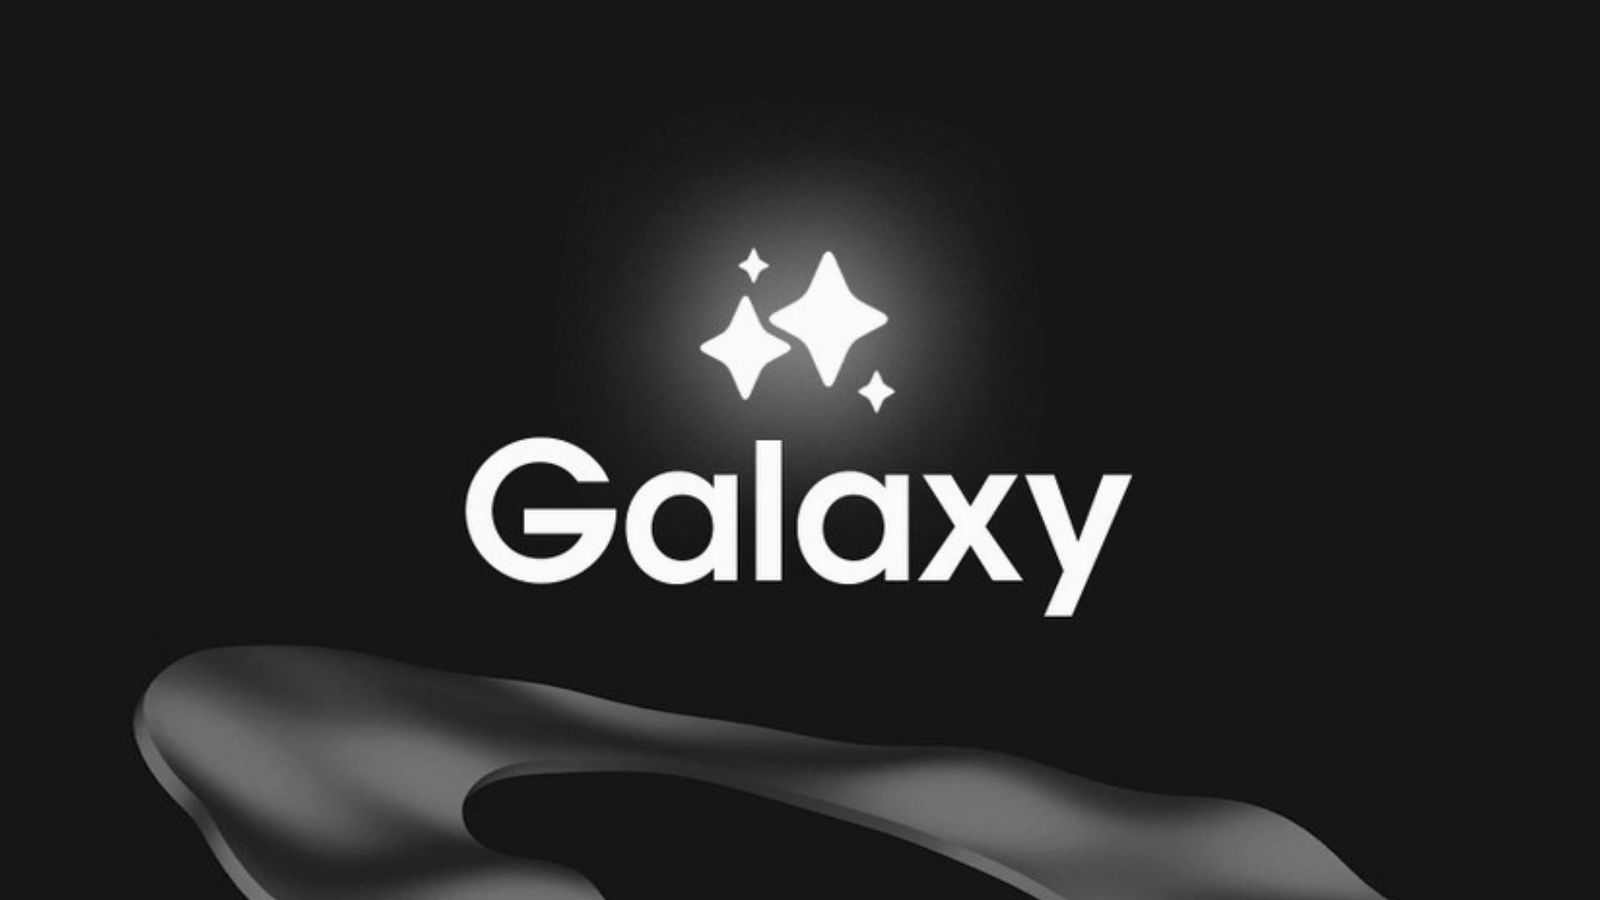 Samsung Galaxy AI features list - An image of the logo of Galaxy AI